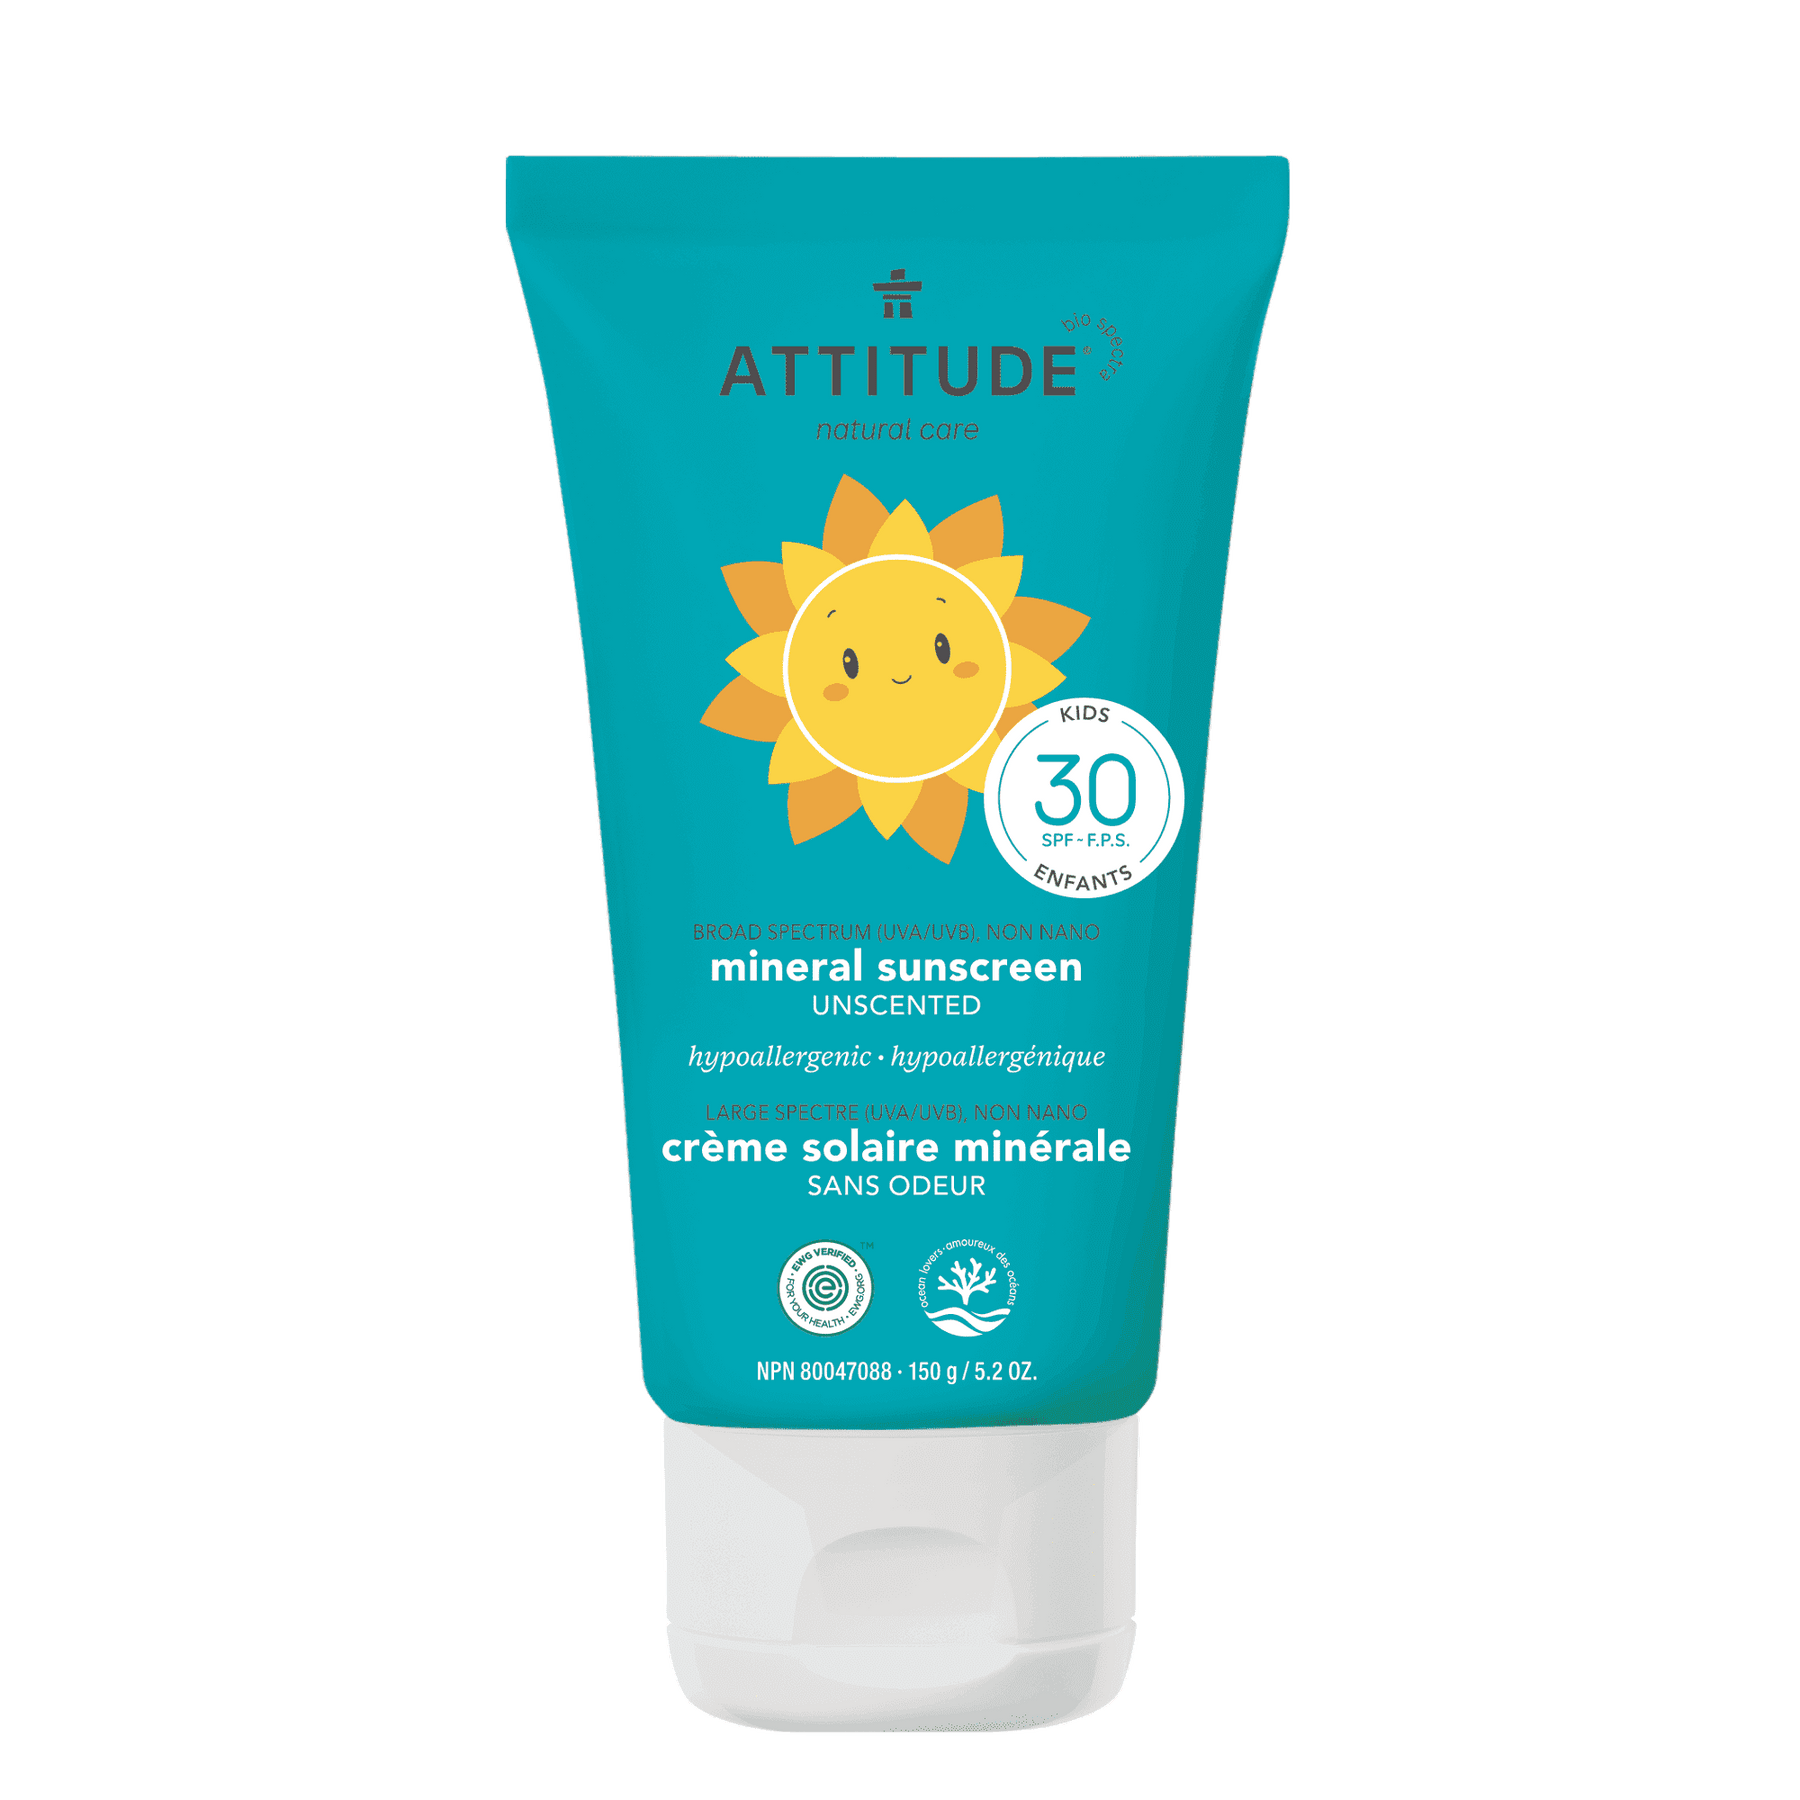 Baby & Kids Moisturizer Mineral Sunscreen : SPF 30 - Unscented / 150g (5,2 OZ.) - ProCare Outlet by Attitude